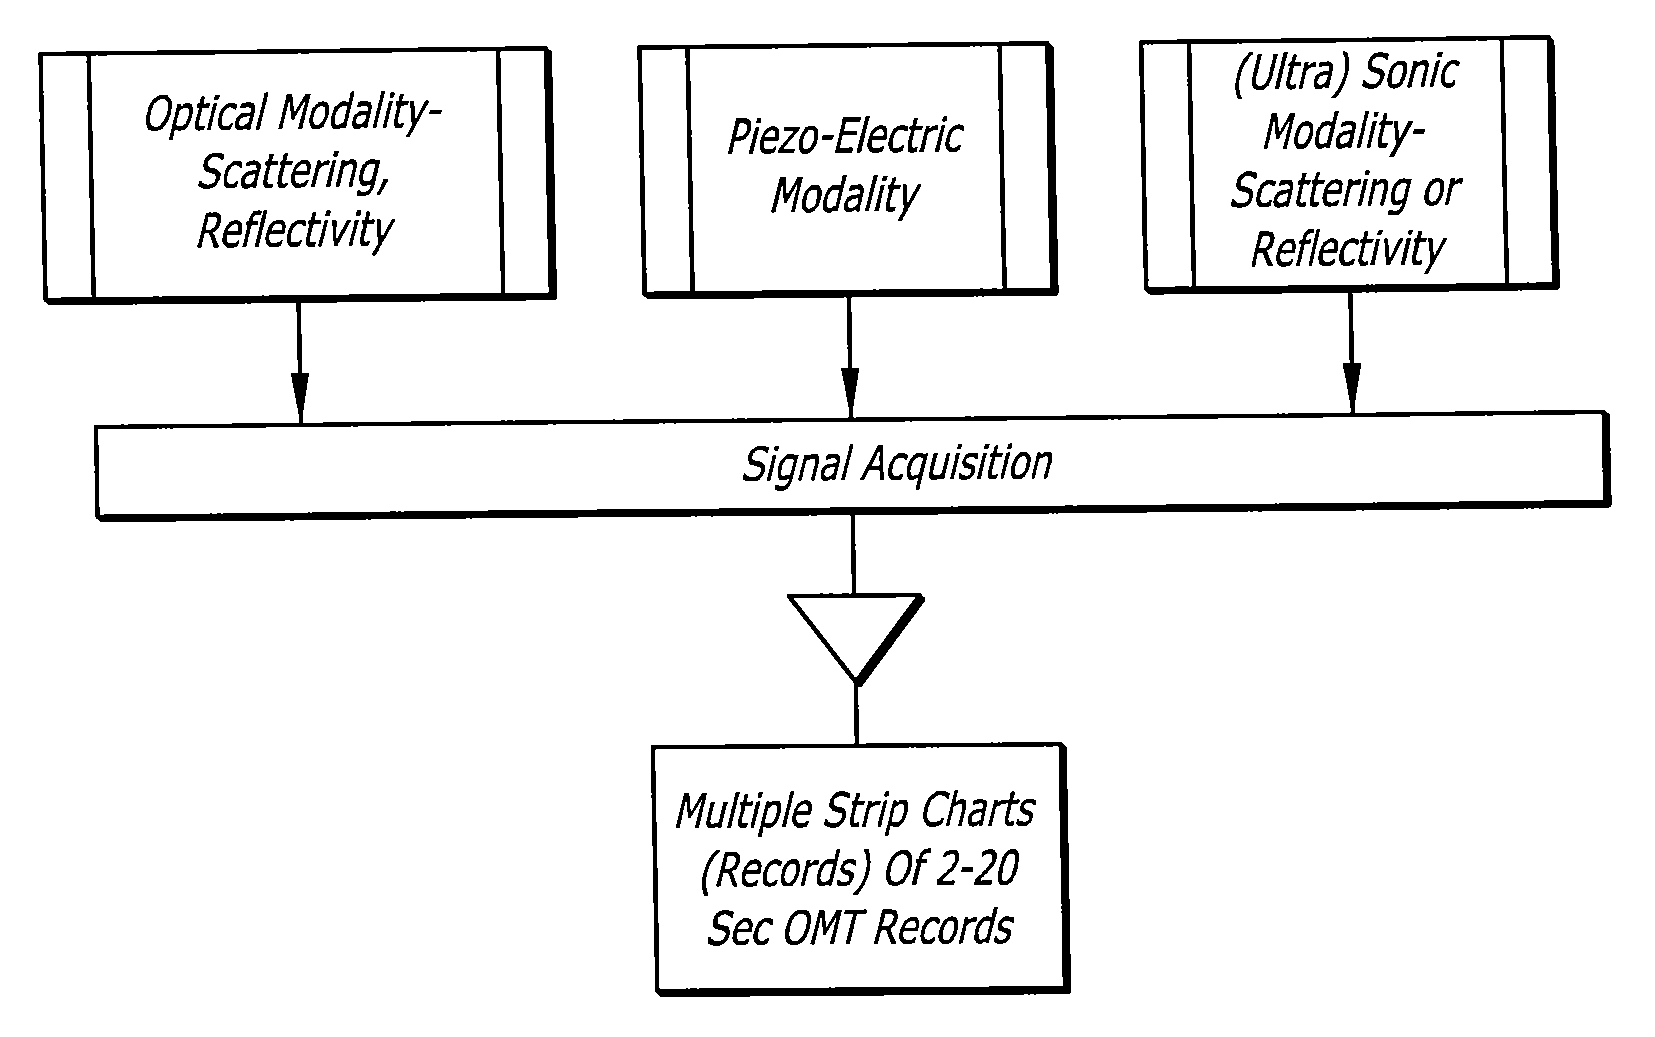 Methods and techniques to measure, map and correlate ocular micro-movement and ocular micro-tremor (OMT) signals with cognitive processing capabilities